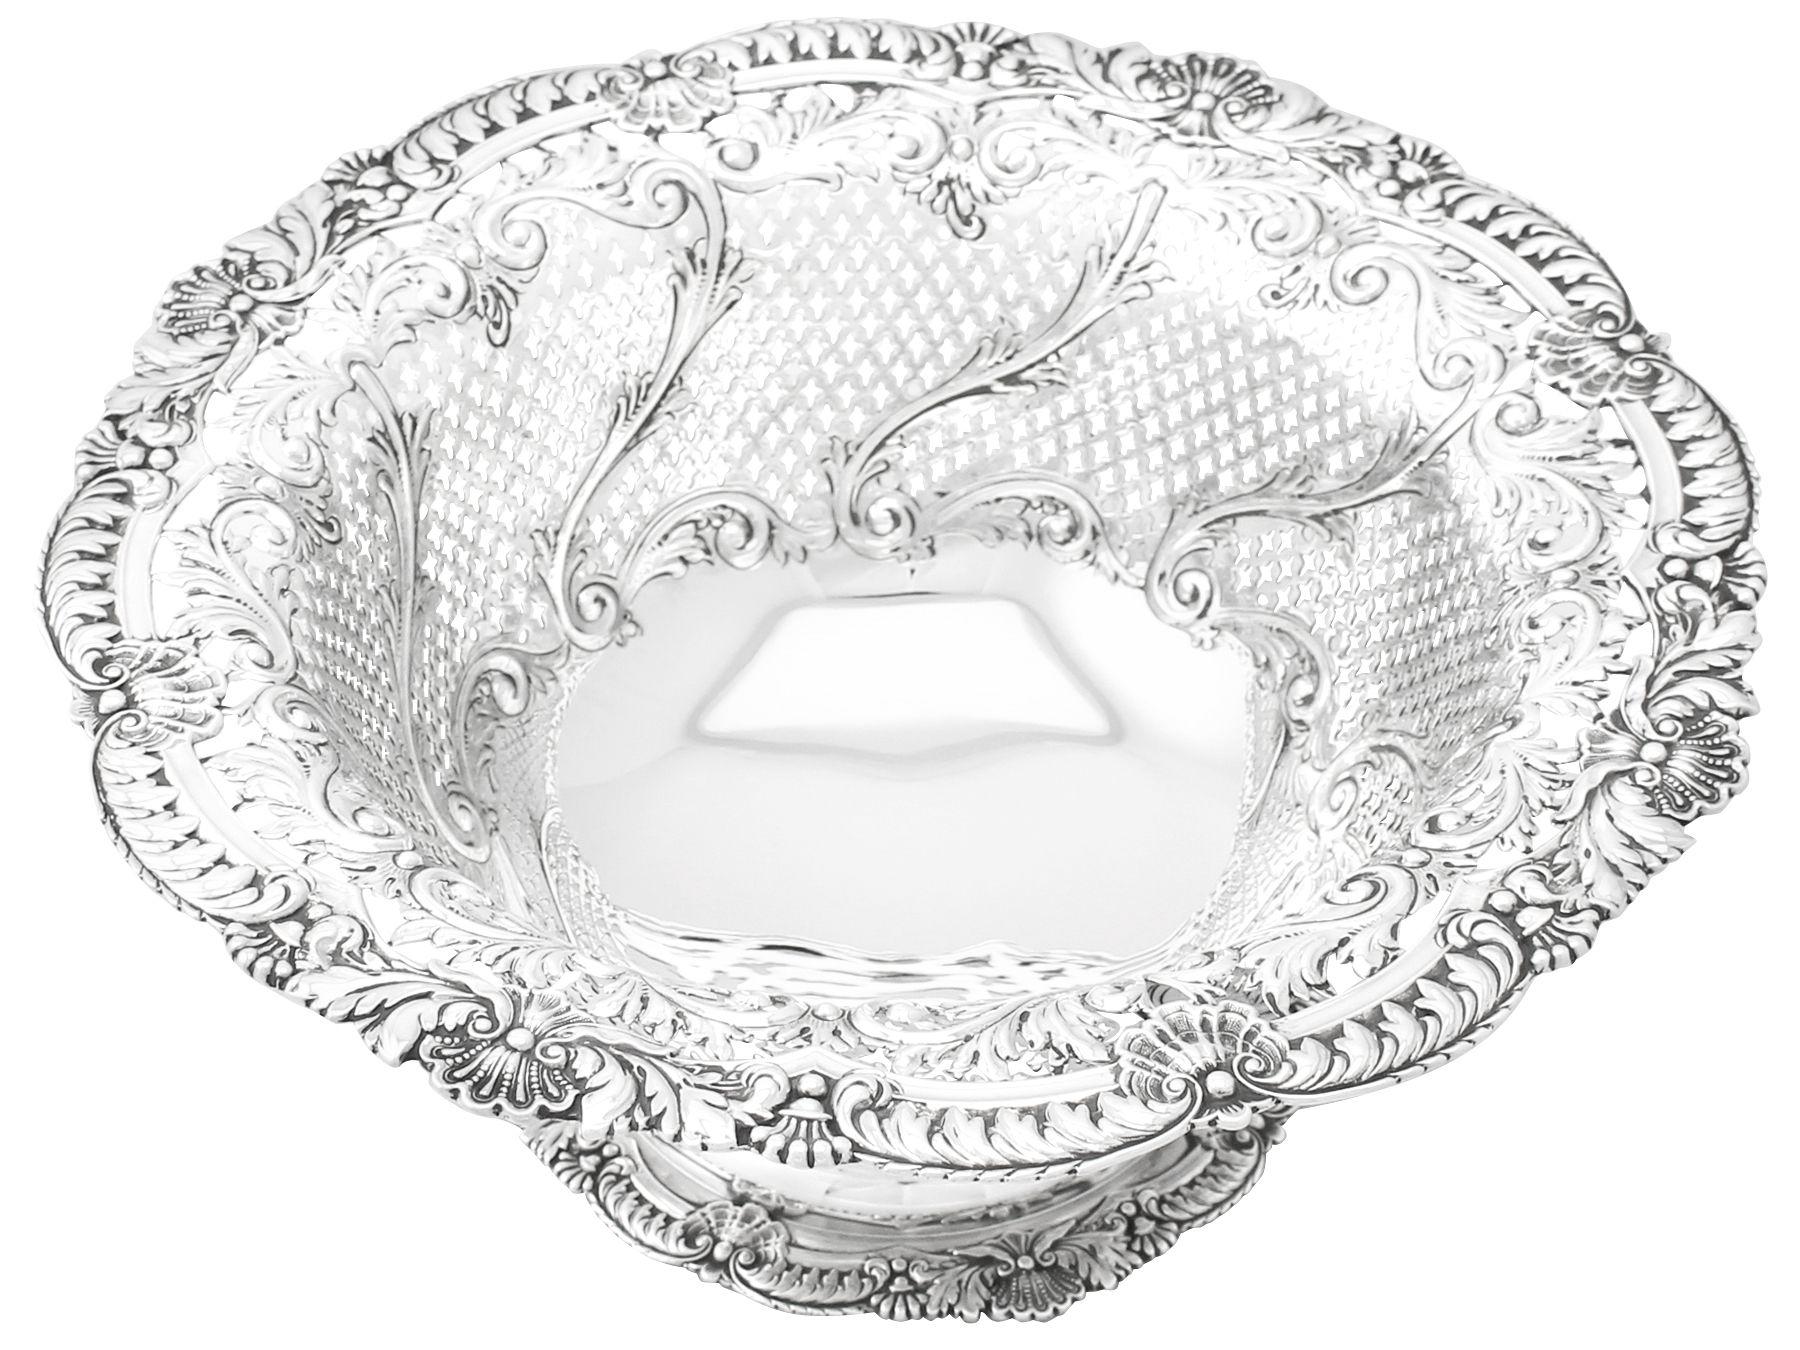 An exceptional, fine and impressive, large antique Edwardian English sterling silver fruit dish; an addition to our silver dining collection

This exceptional antique Edwardian sterling silver dish has a circular rounded form onto a circular domed